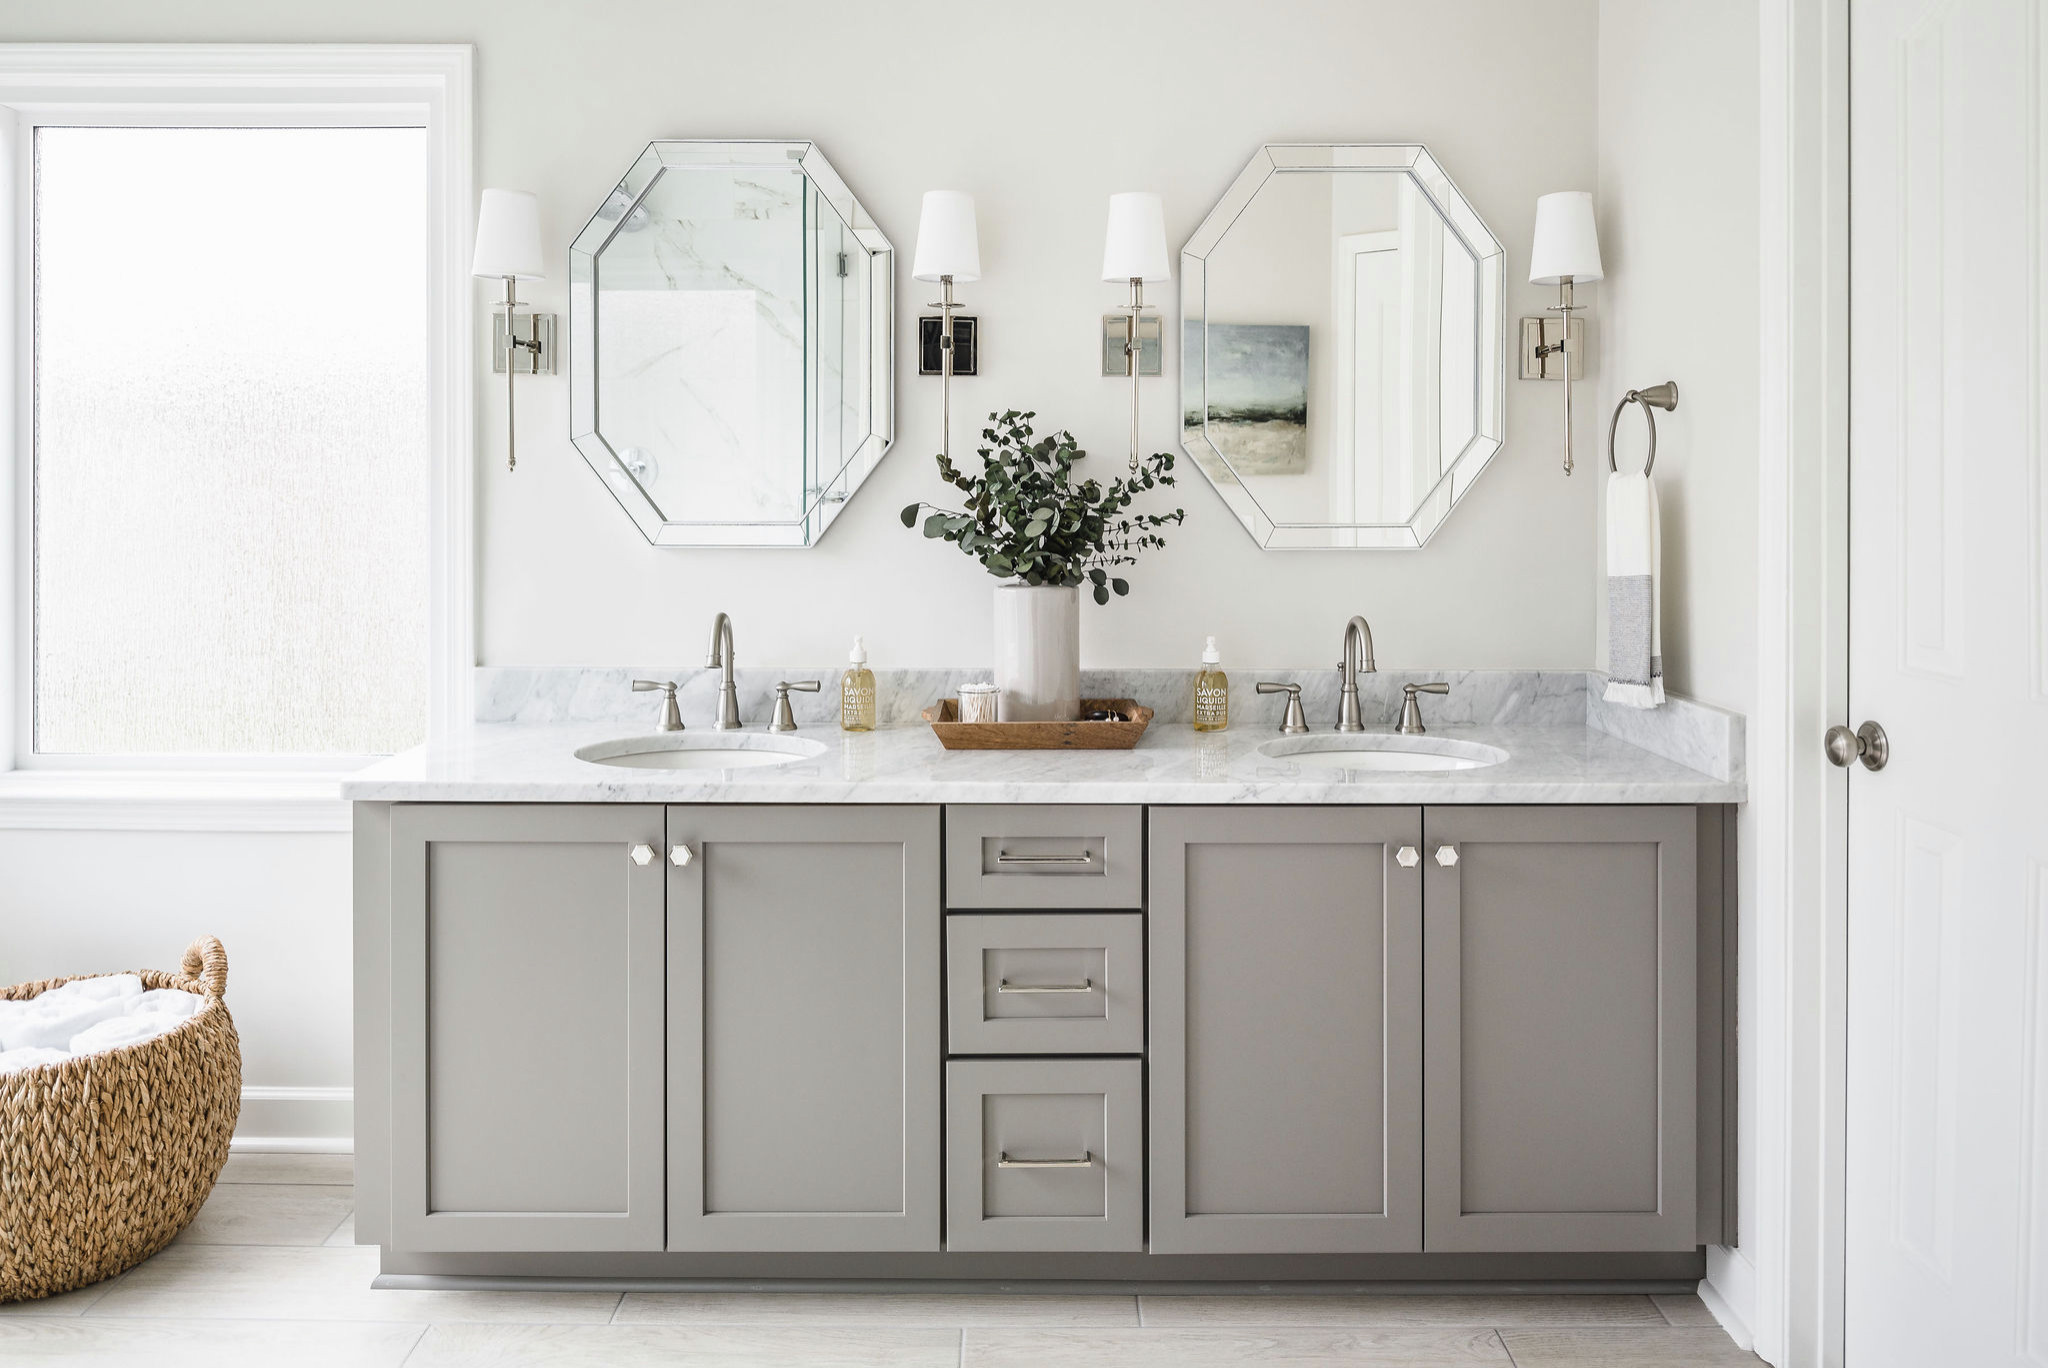 75 Beautiful Bathroom Pictures Ideas October 2020 Houzz,How To Cook Chicken Of The Woods